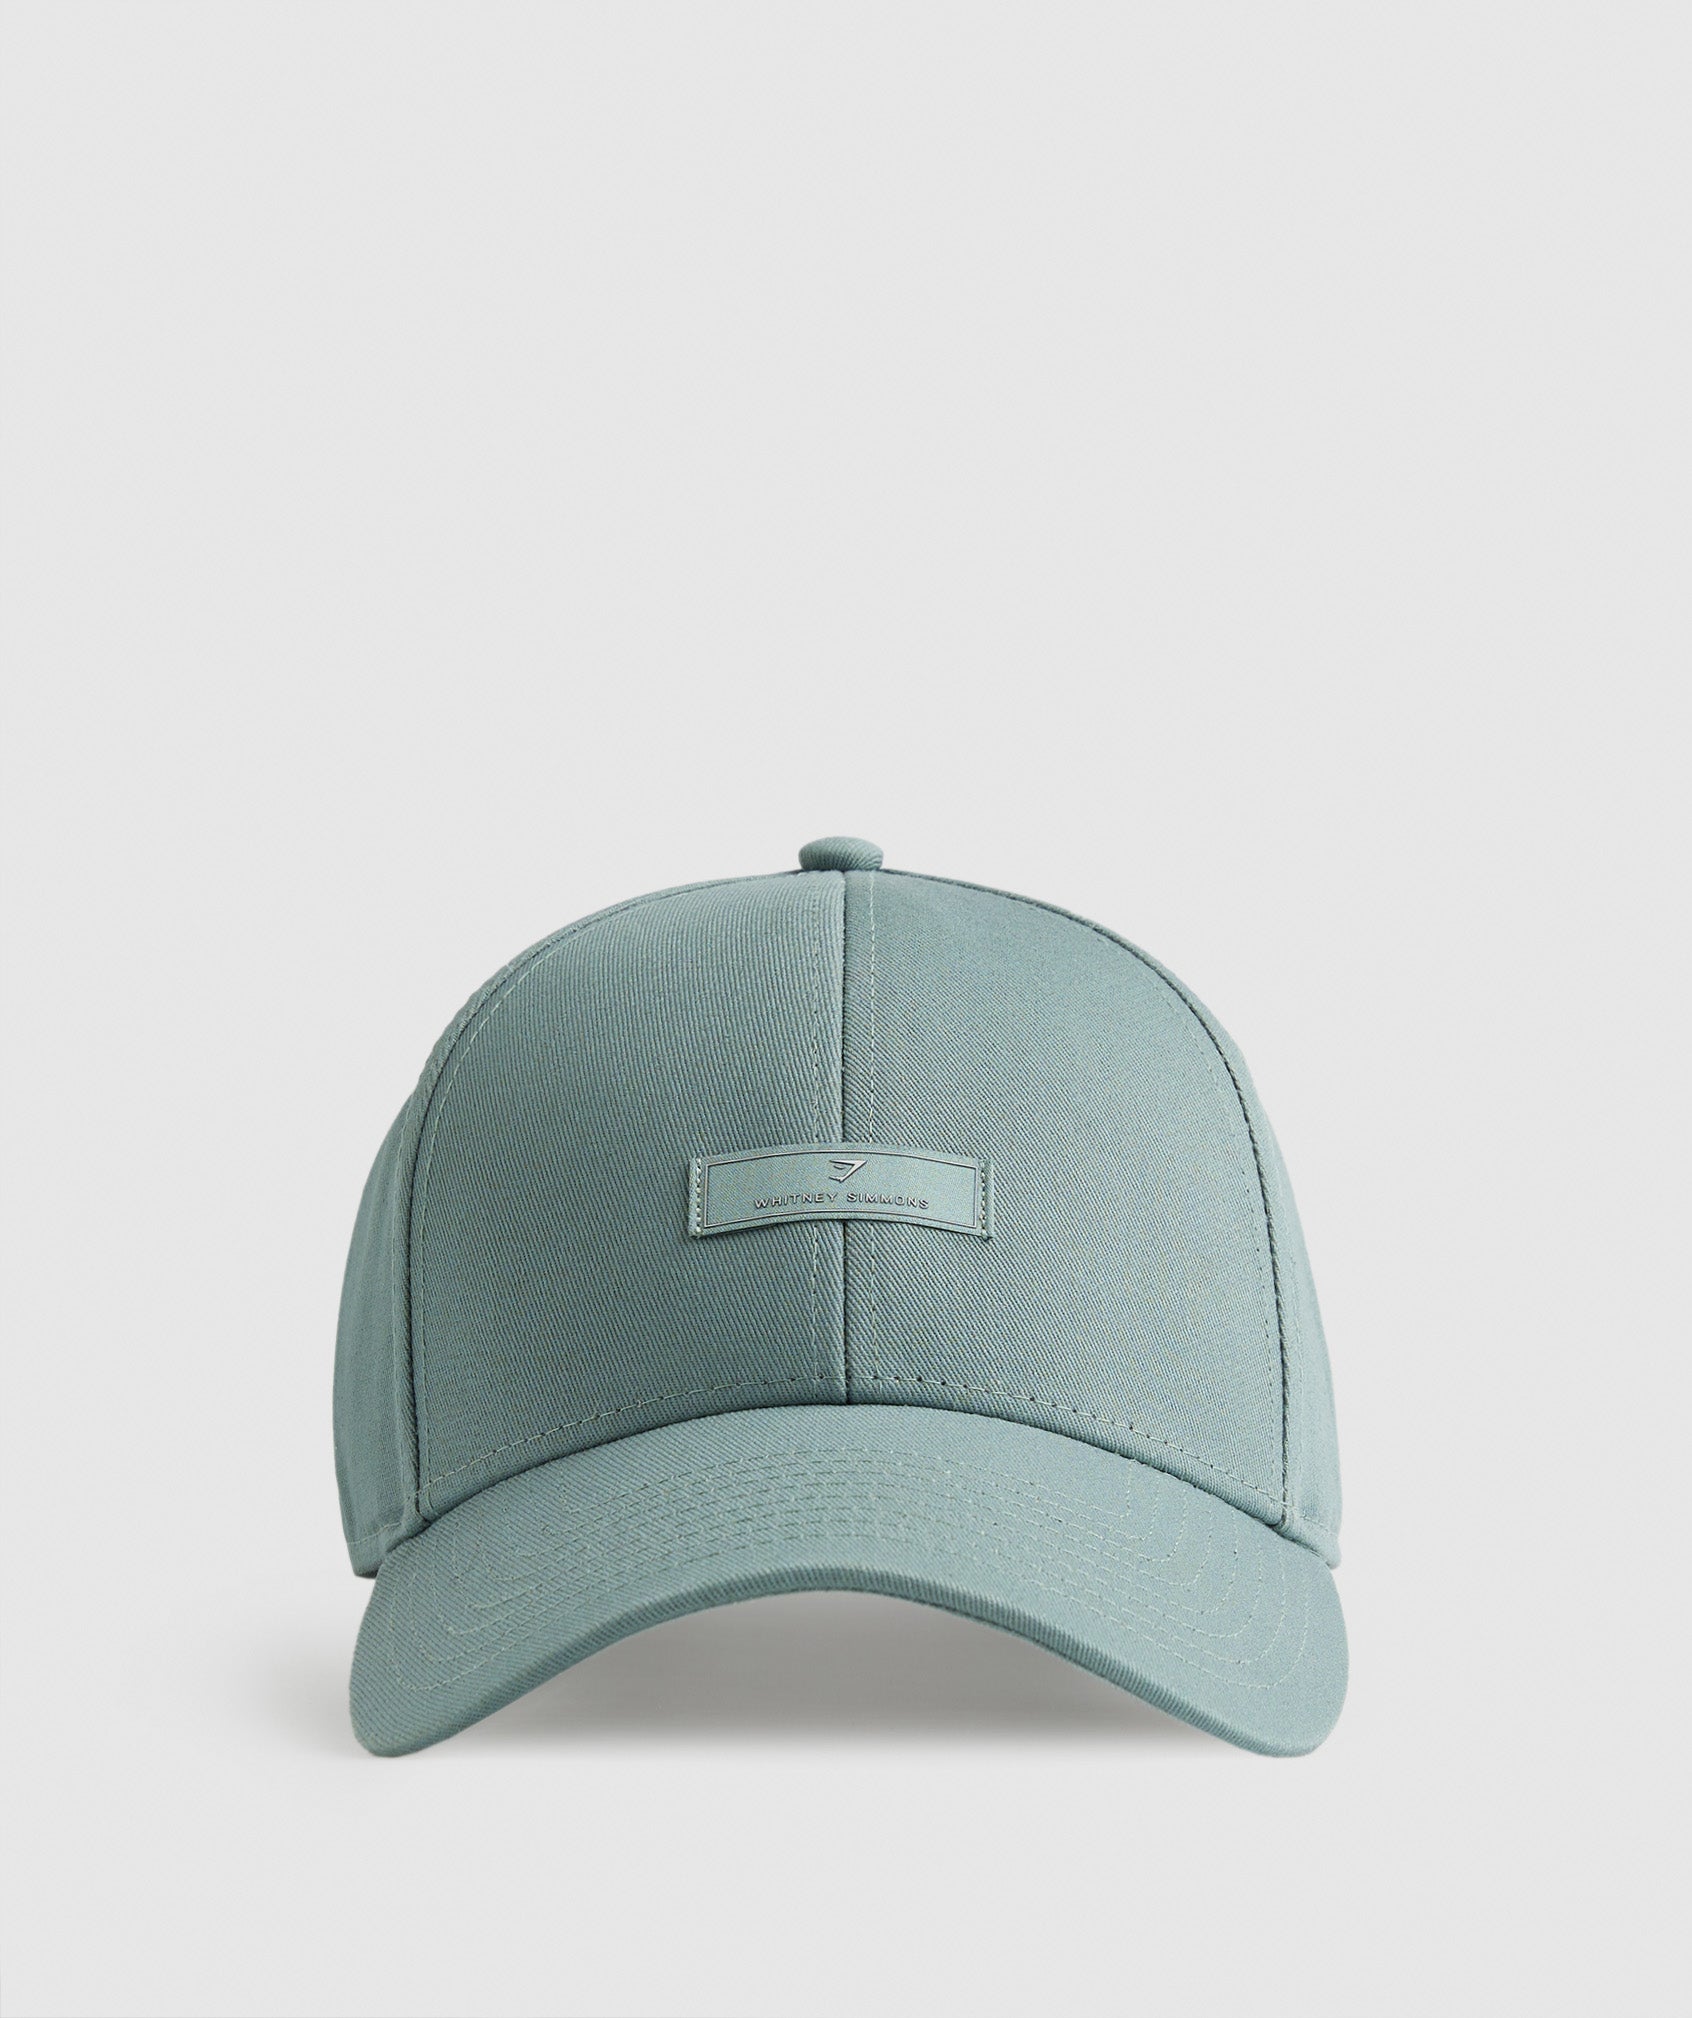 Whitney Cap in Leaf Green - view 1